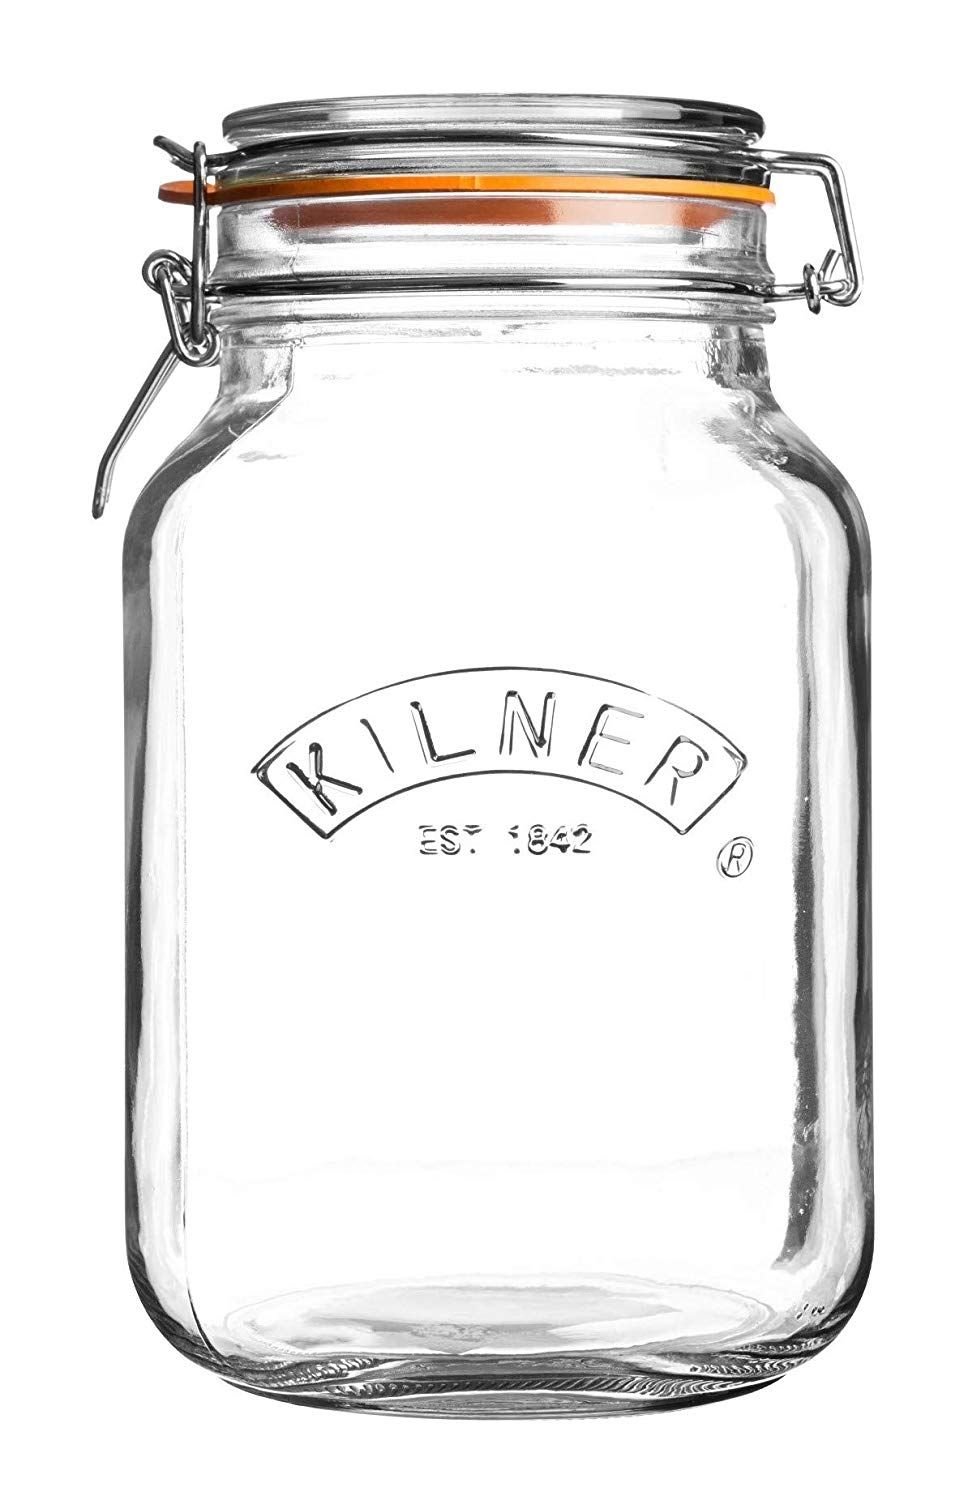 Kilner Clip Top Jar Set for Storing Spices and Herbs Wooden Crate